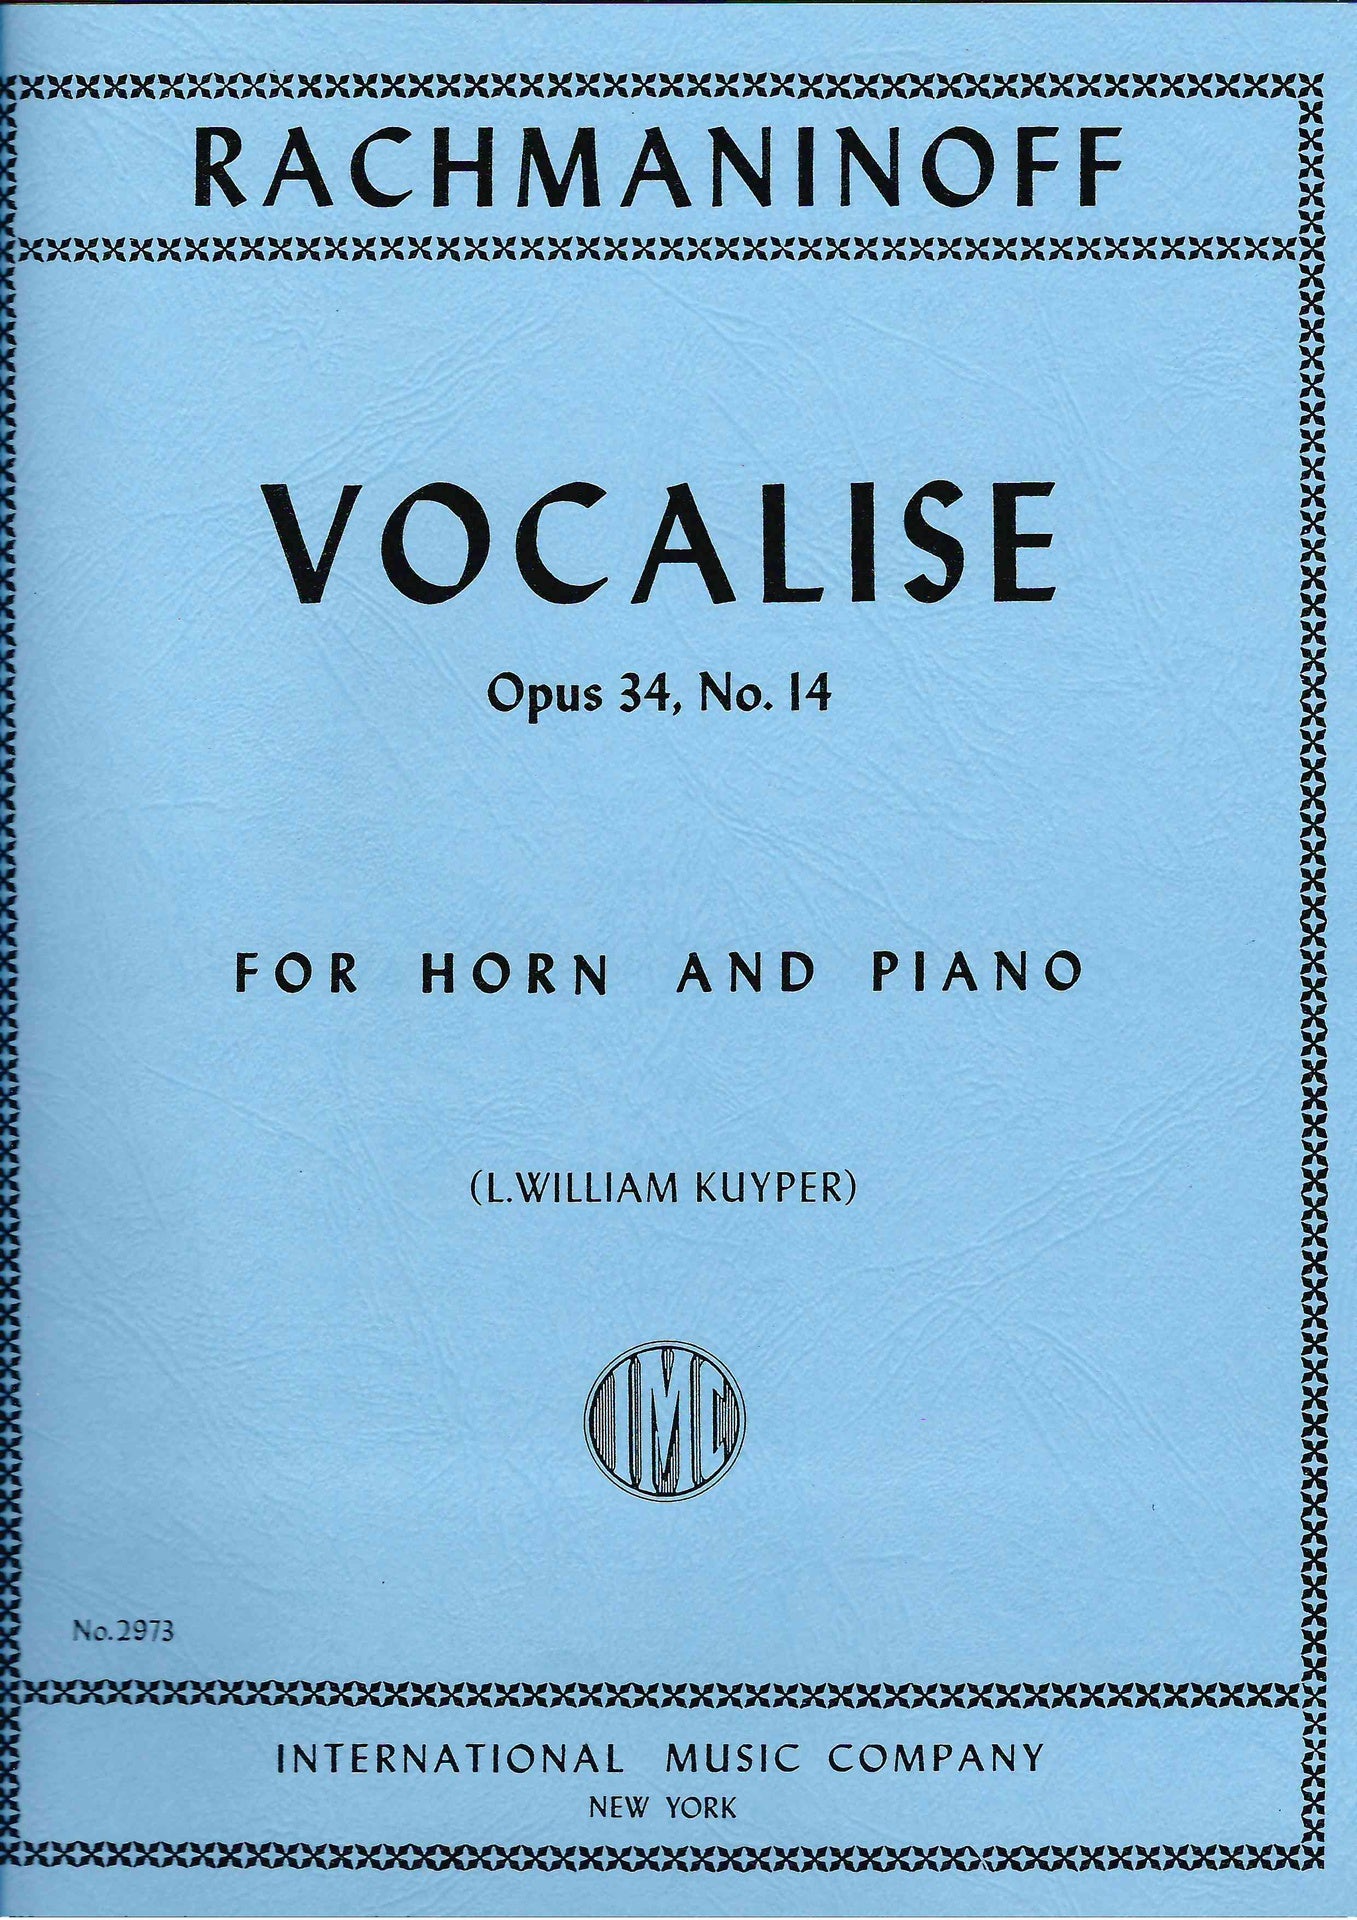 Rachmaninov - Vocalise Op34/14 - French Horn/Piano Accompaniment arranged by Kuyper IMC IMC2973